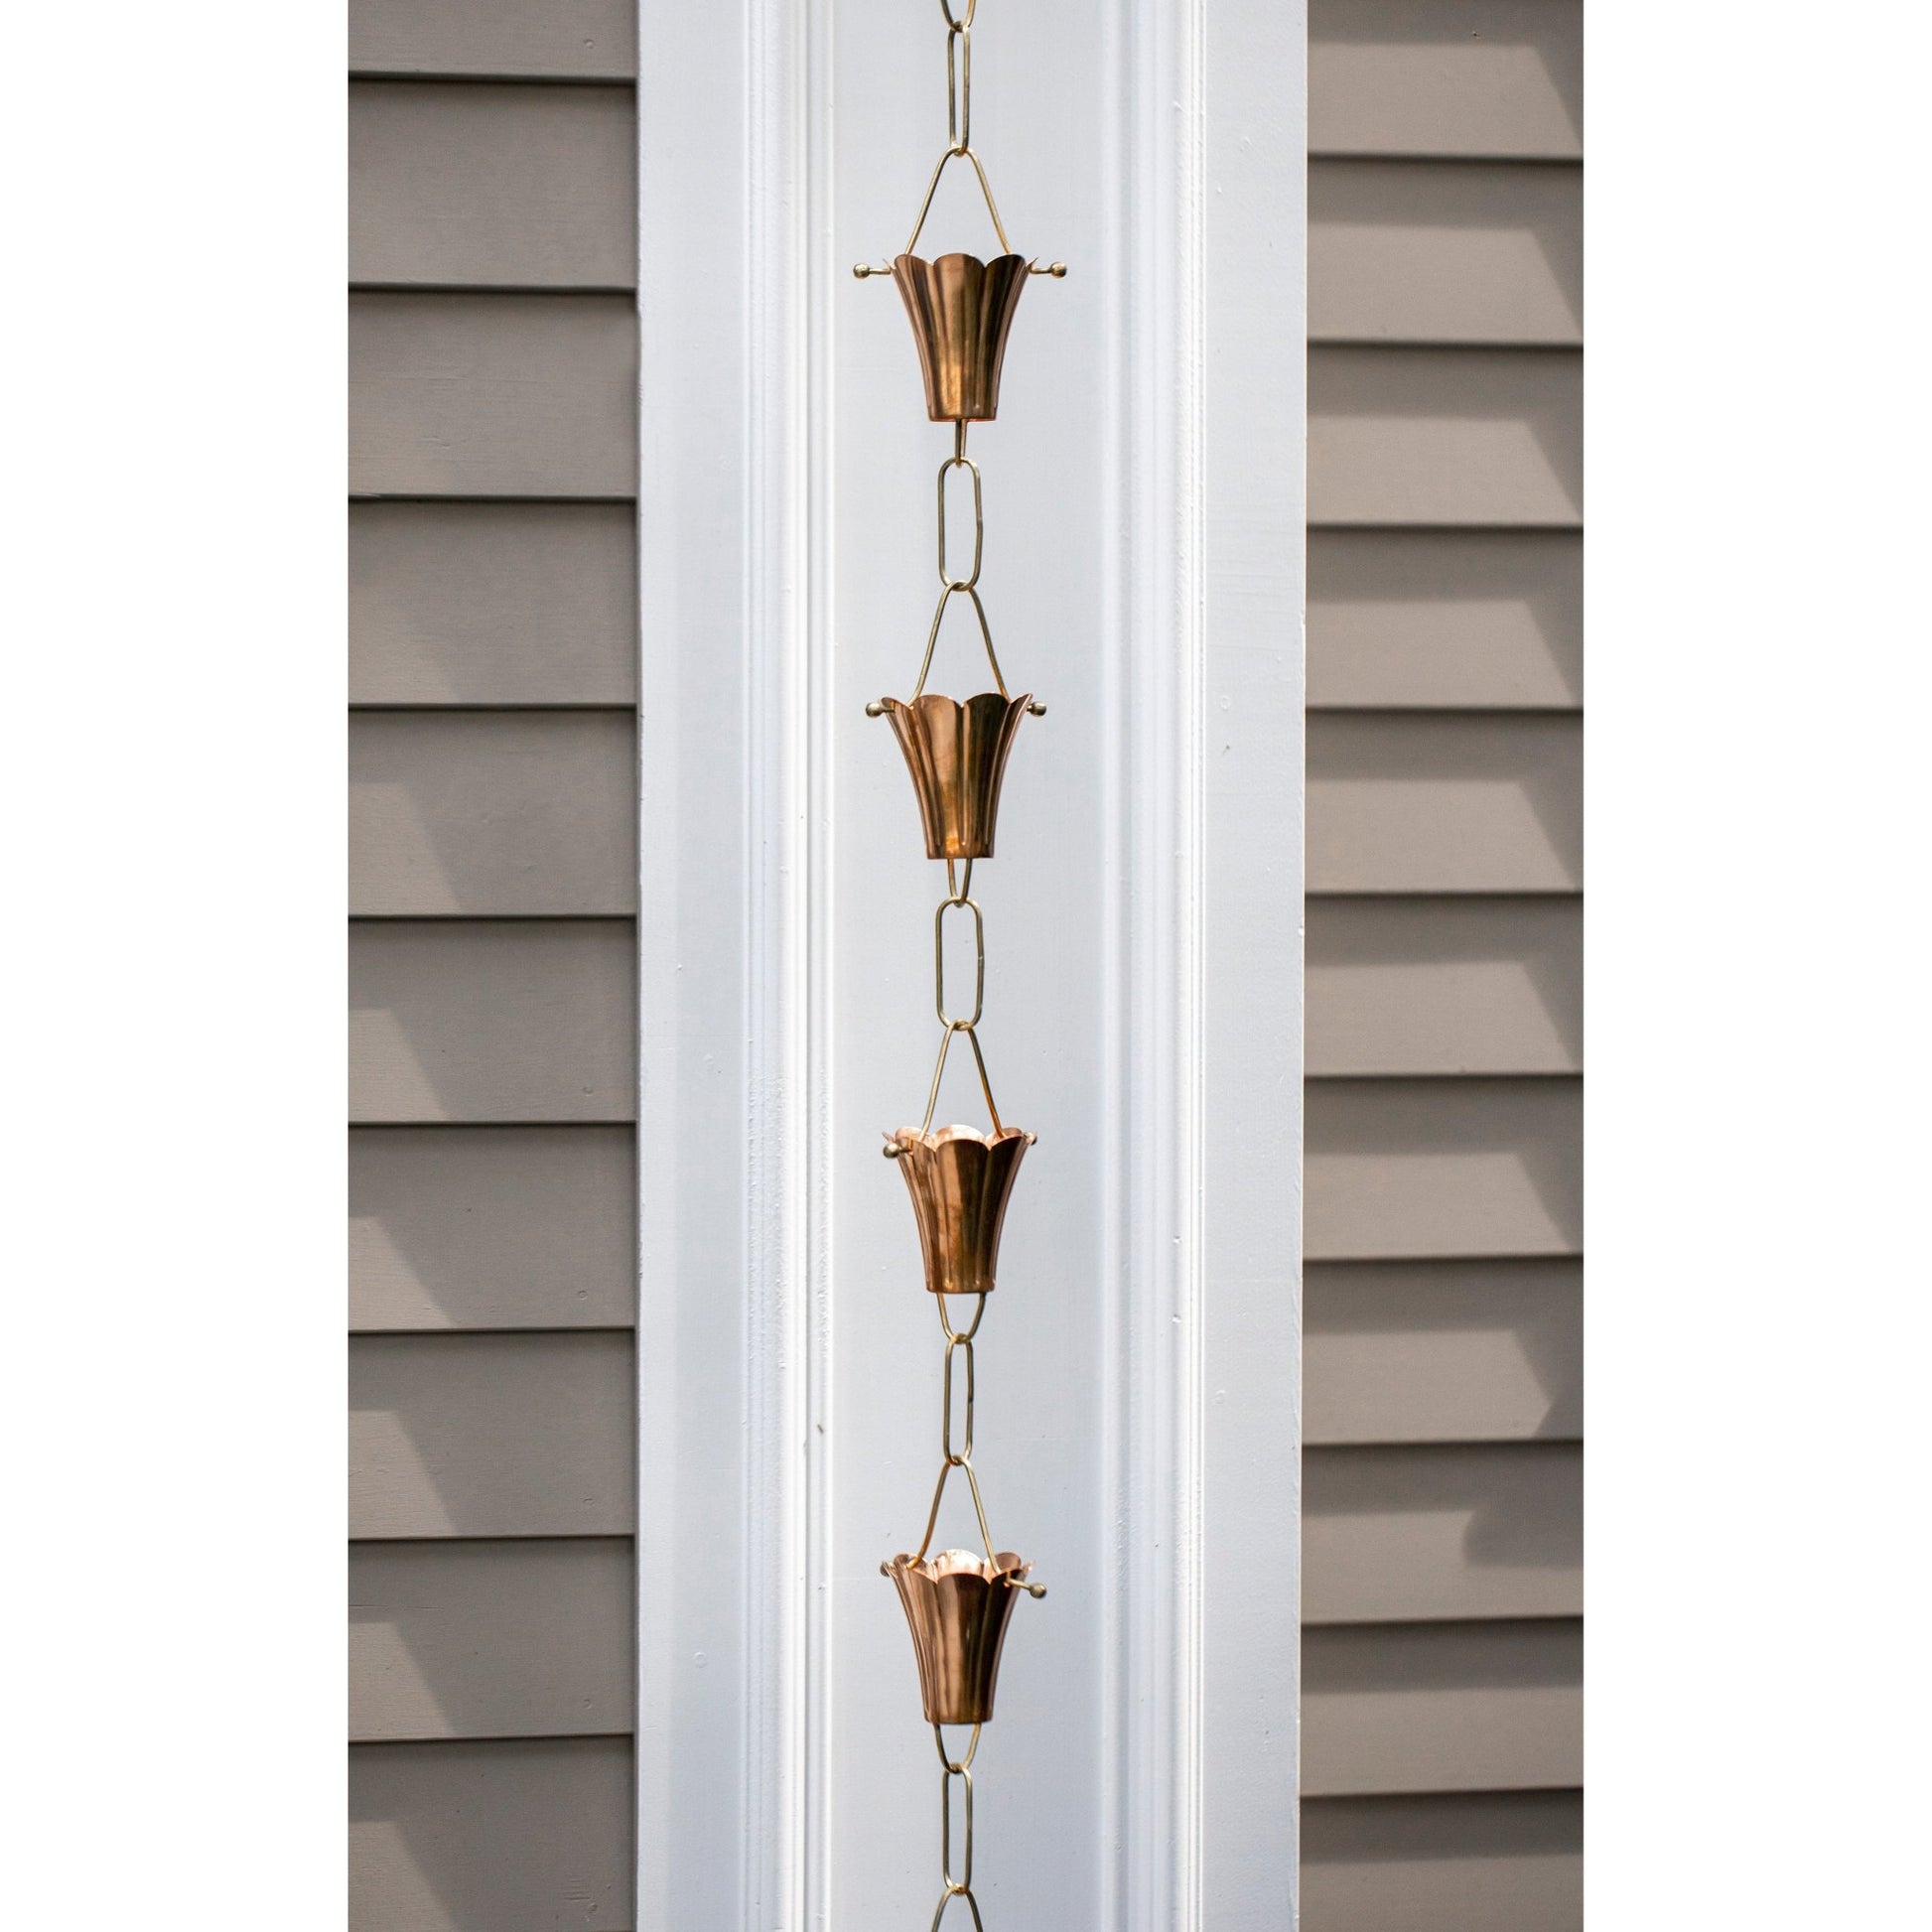 Fluted Flower Rain Chain - 8.5 ft., with 11 Large Cups - Good Directions